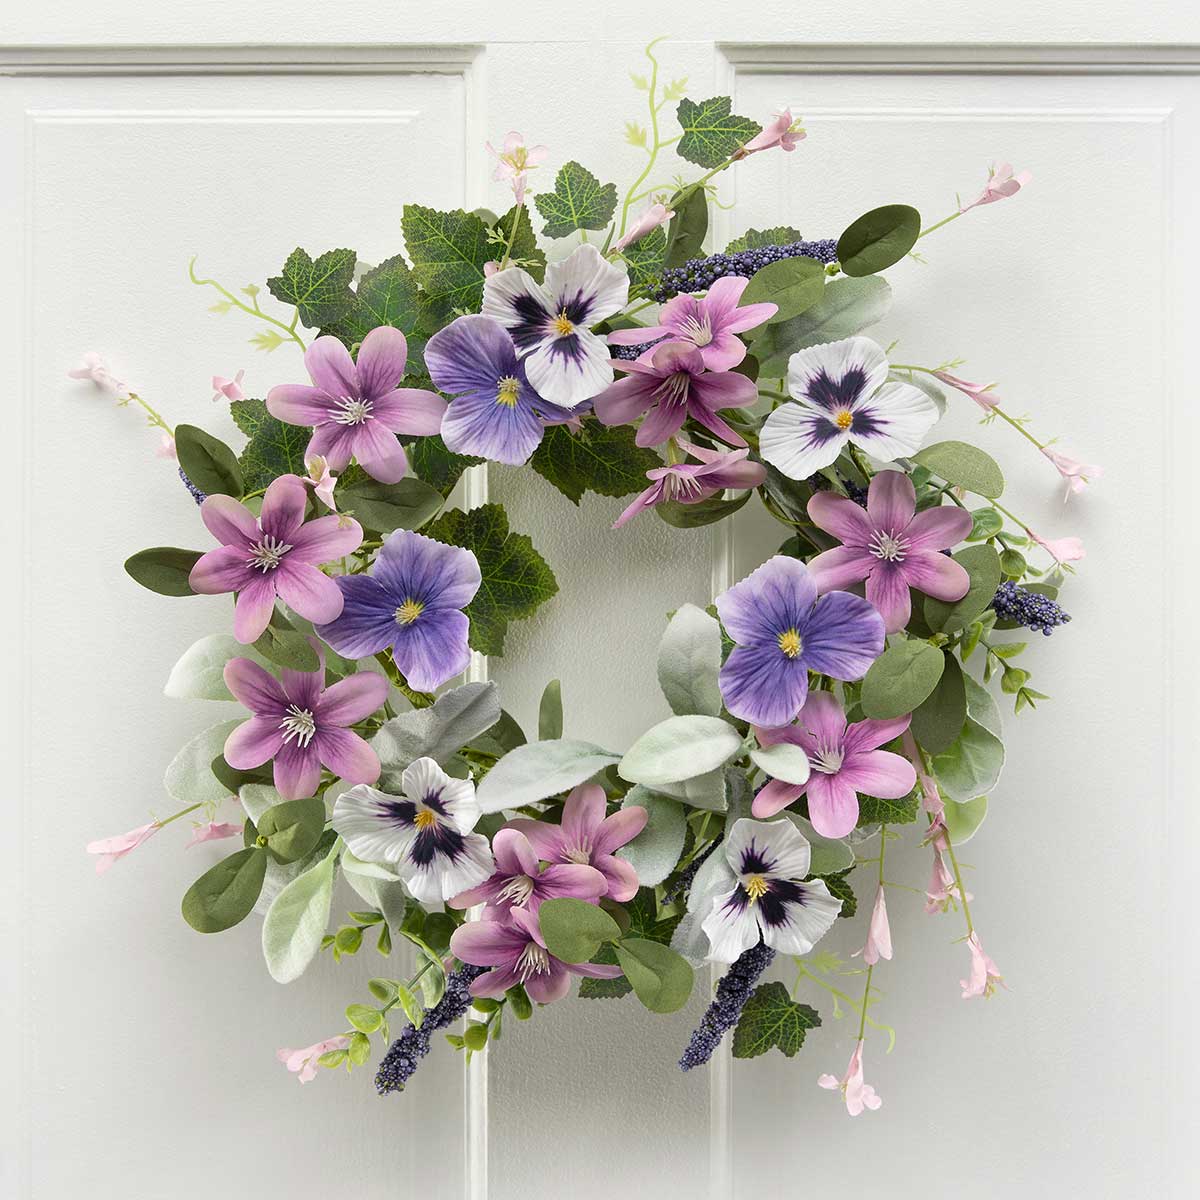 MINI WREATH PANSY BLOSSOM 18IN (INNER RING 6.5IN) PURPLE